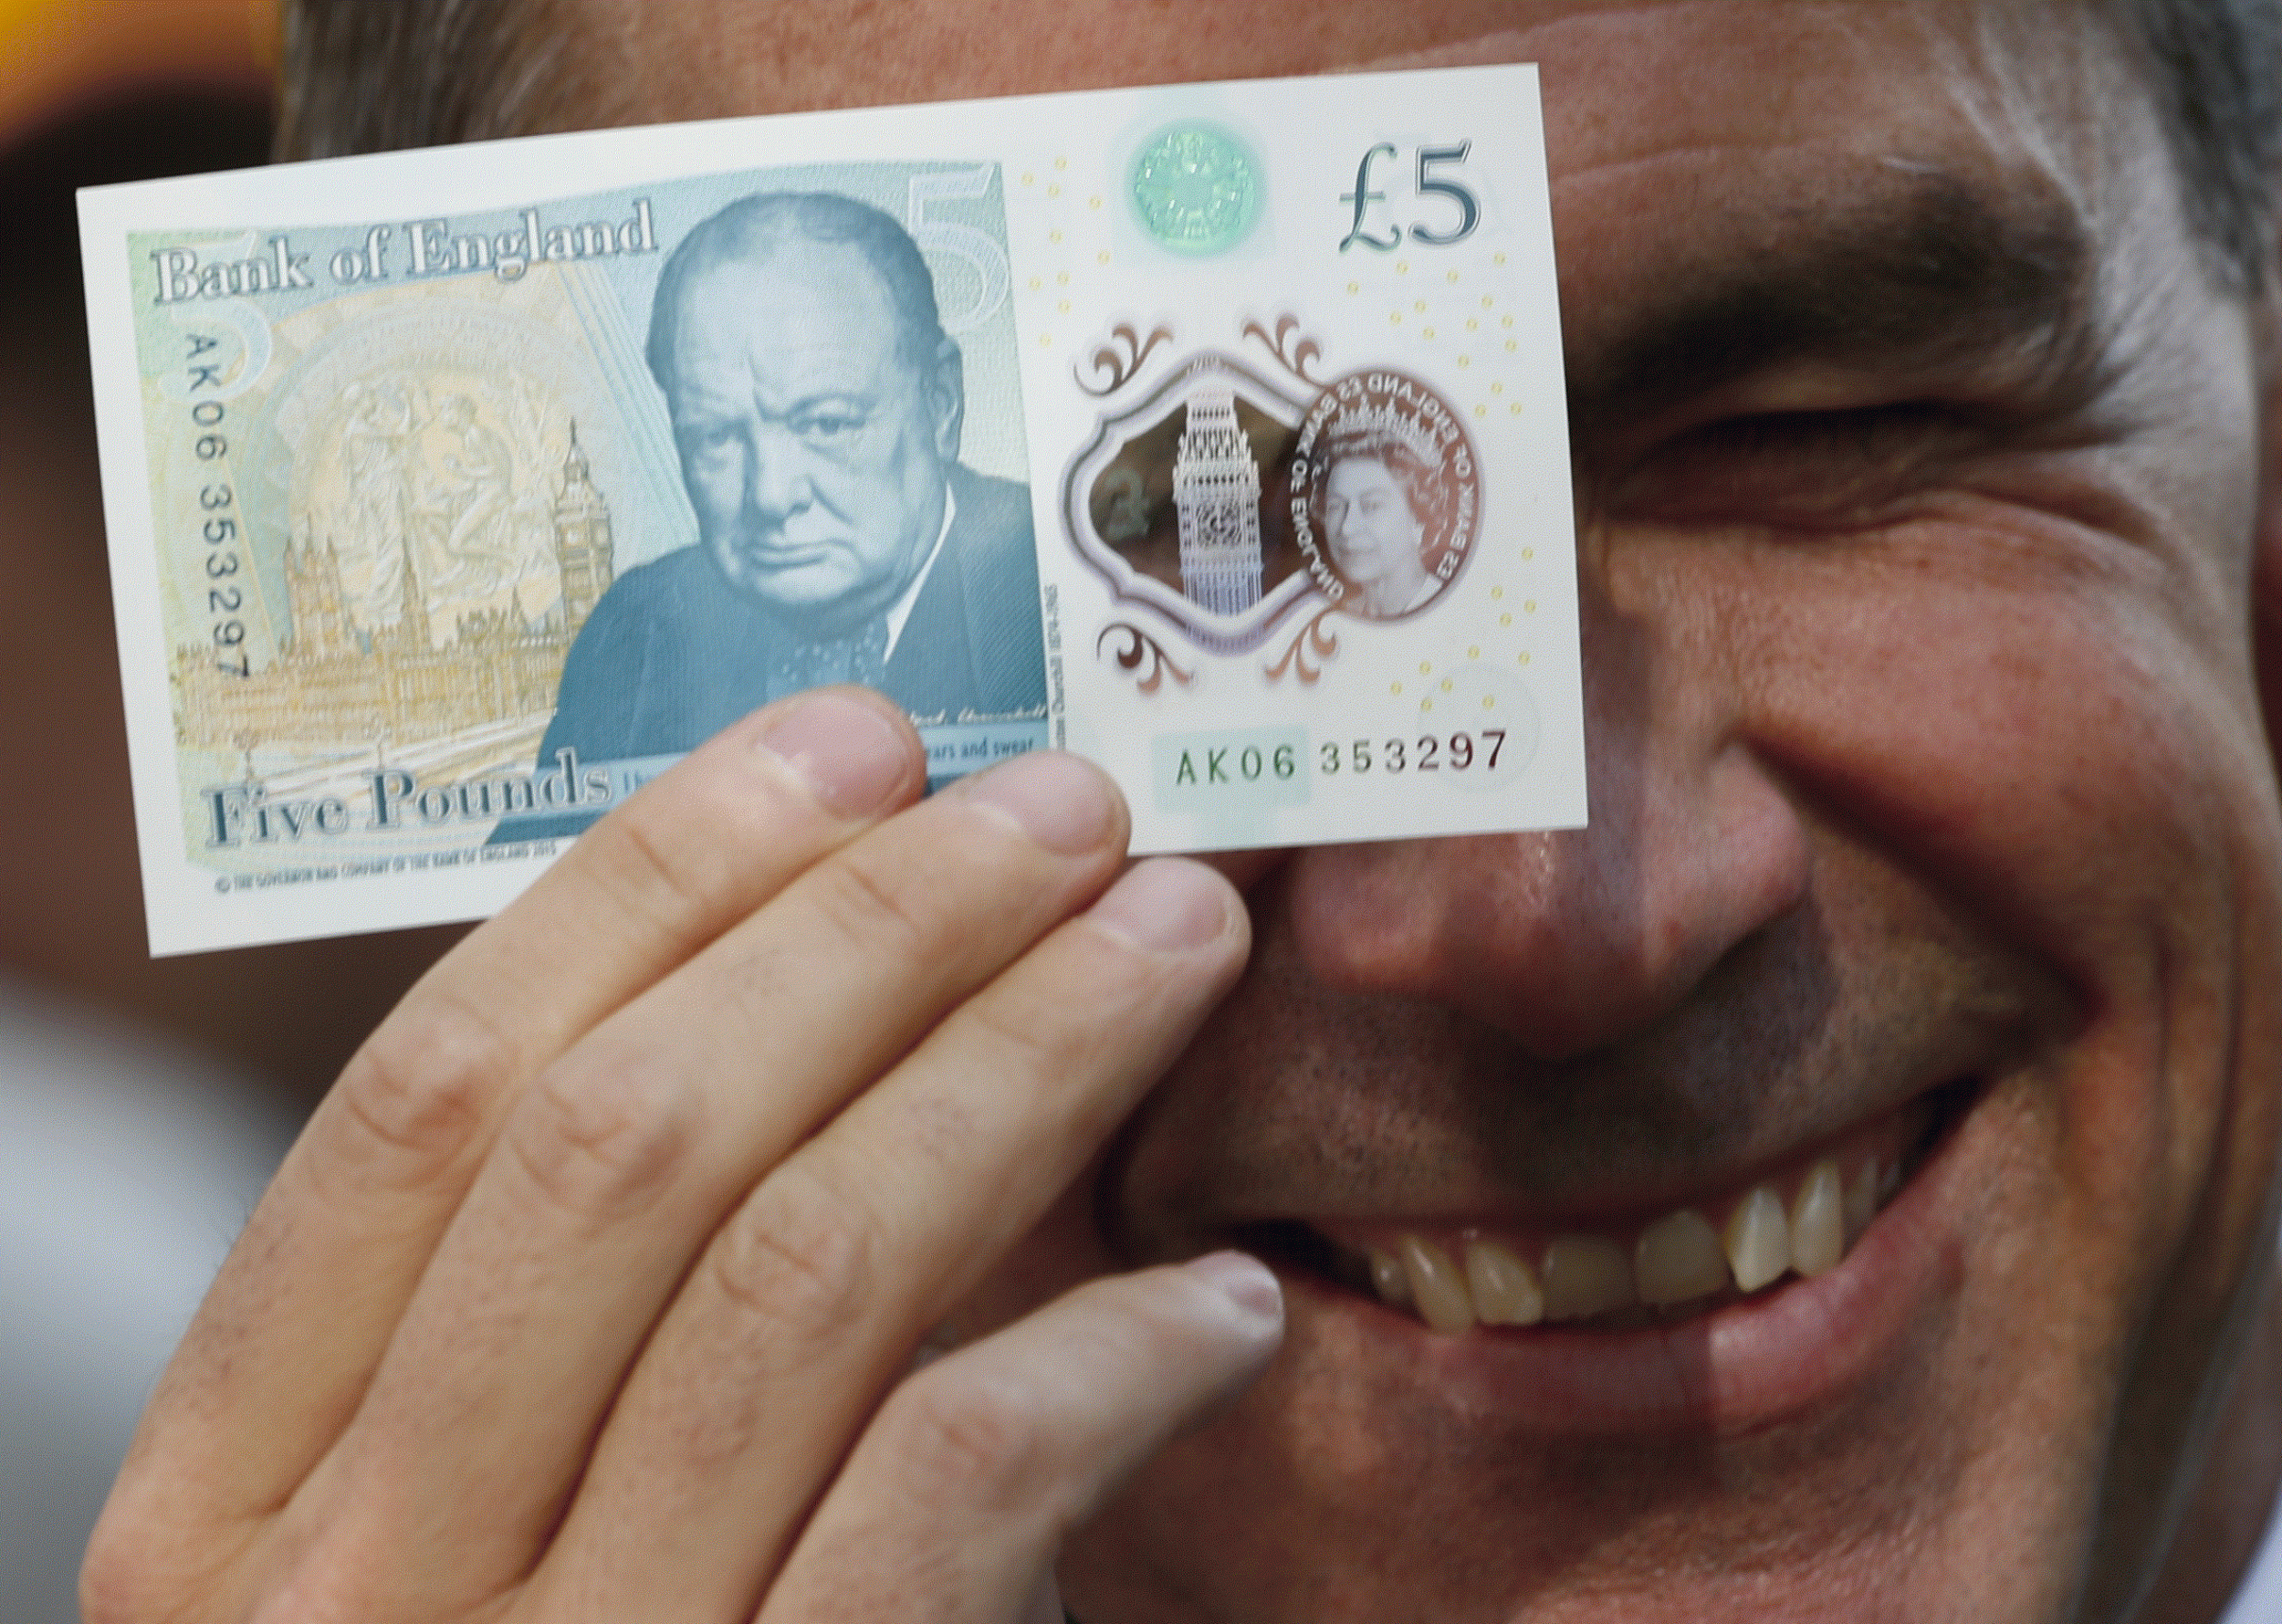 There is a global banknote beauty pageant, new £5 is a finalist